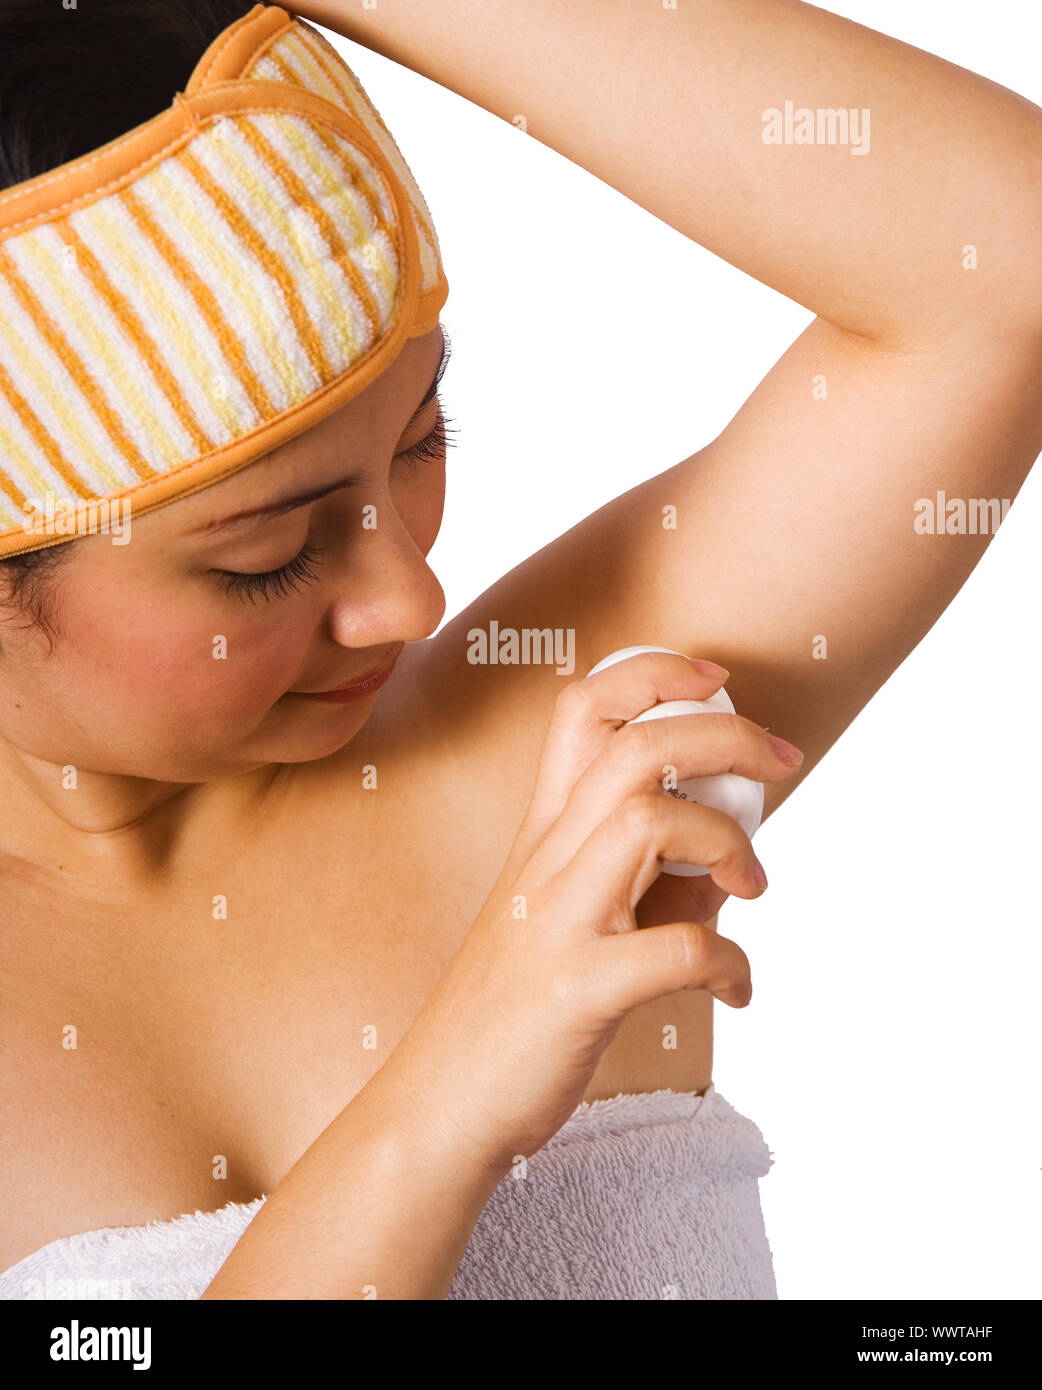 Woman Putting On Underarm Deodorant After A Shower Stock Photo - Alamy